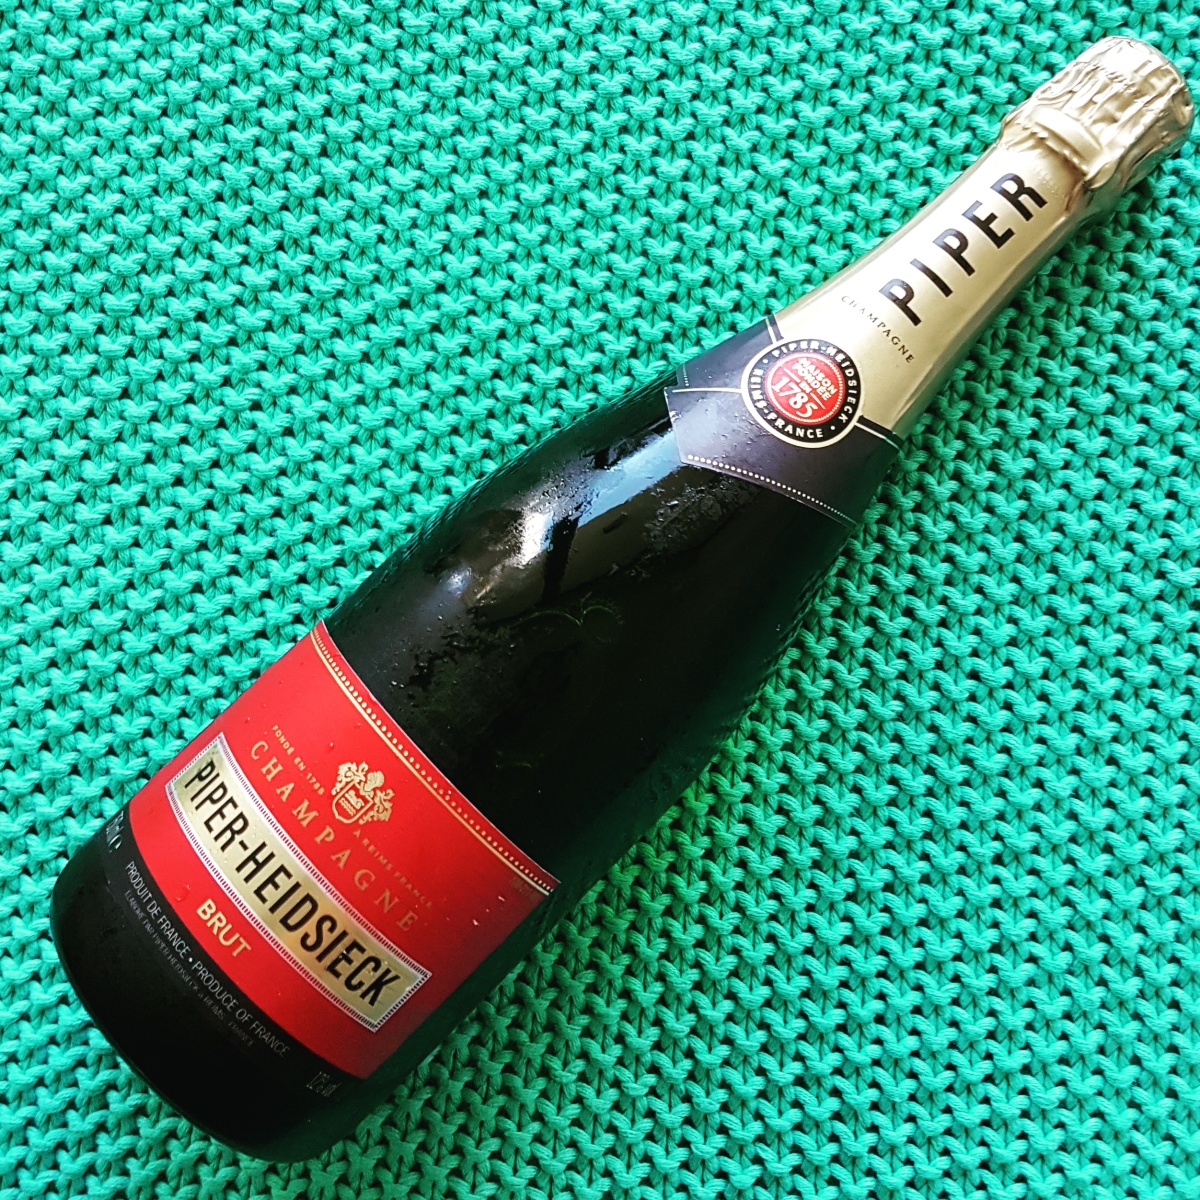 Piper Review: Champagne Cuvee – Heidsieck Brut NV Tips